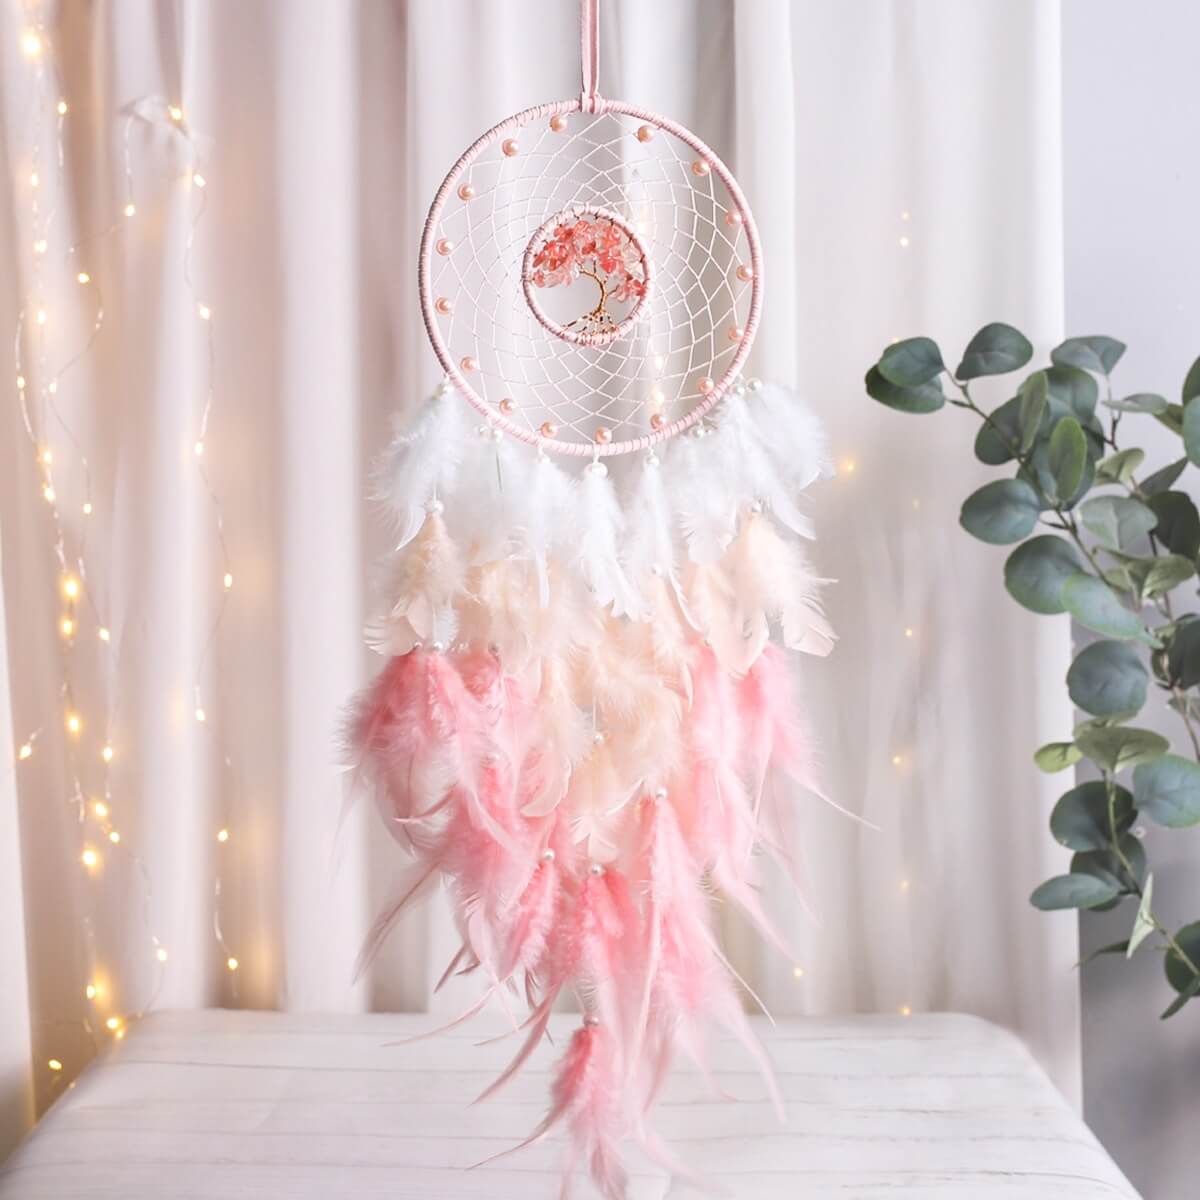 pink feather soft girl aesthetic wall hanging dream catcher decor